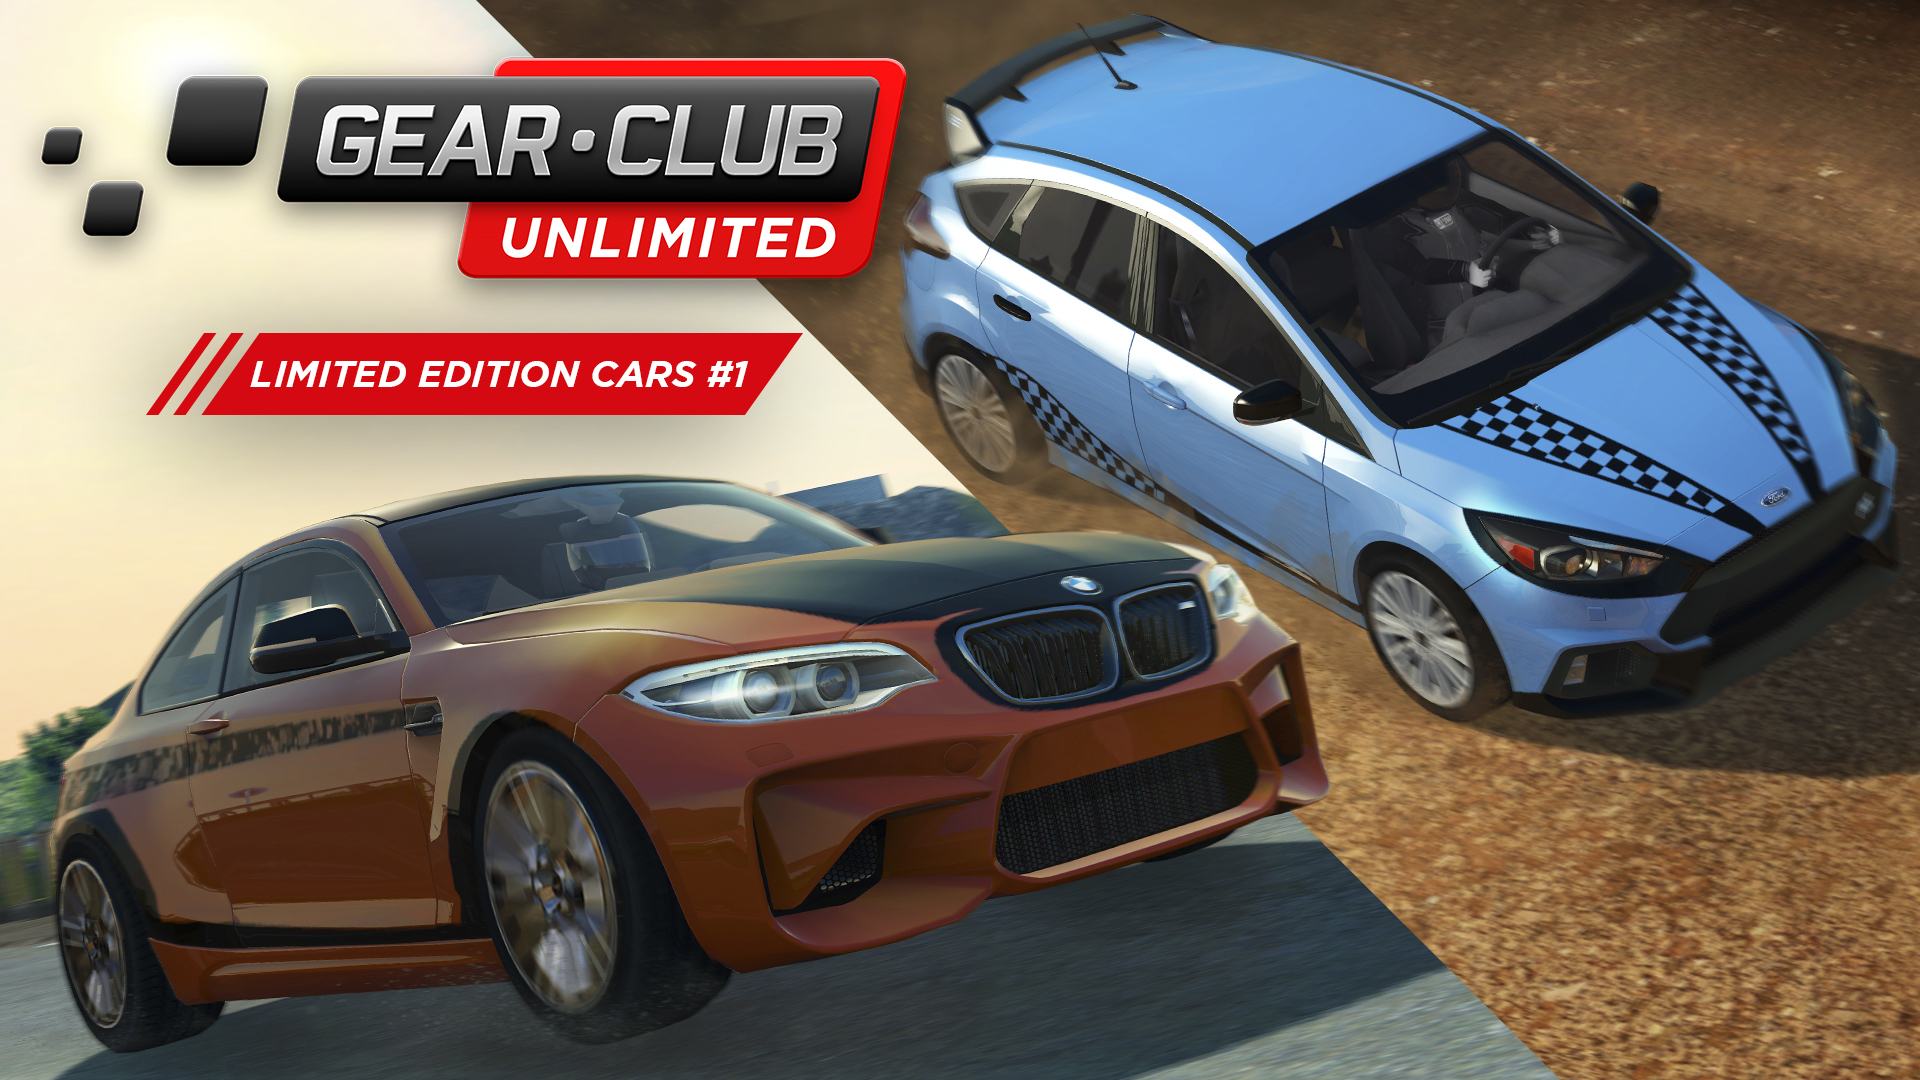 Gear.Club Unlimited: Limited Edition Cars Pack #1